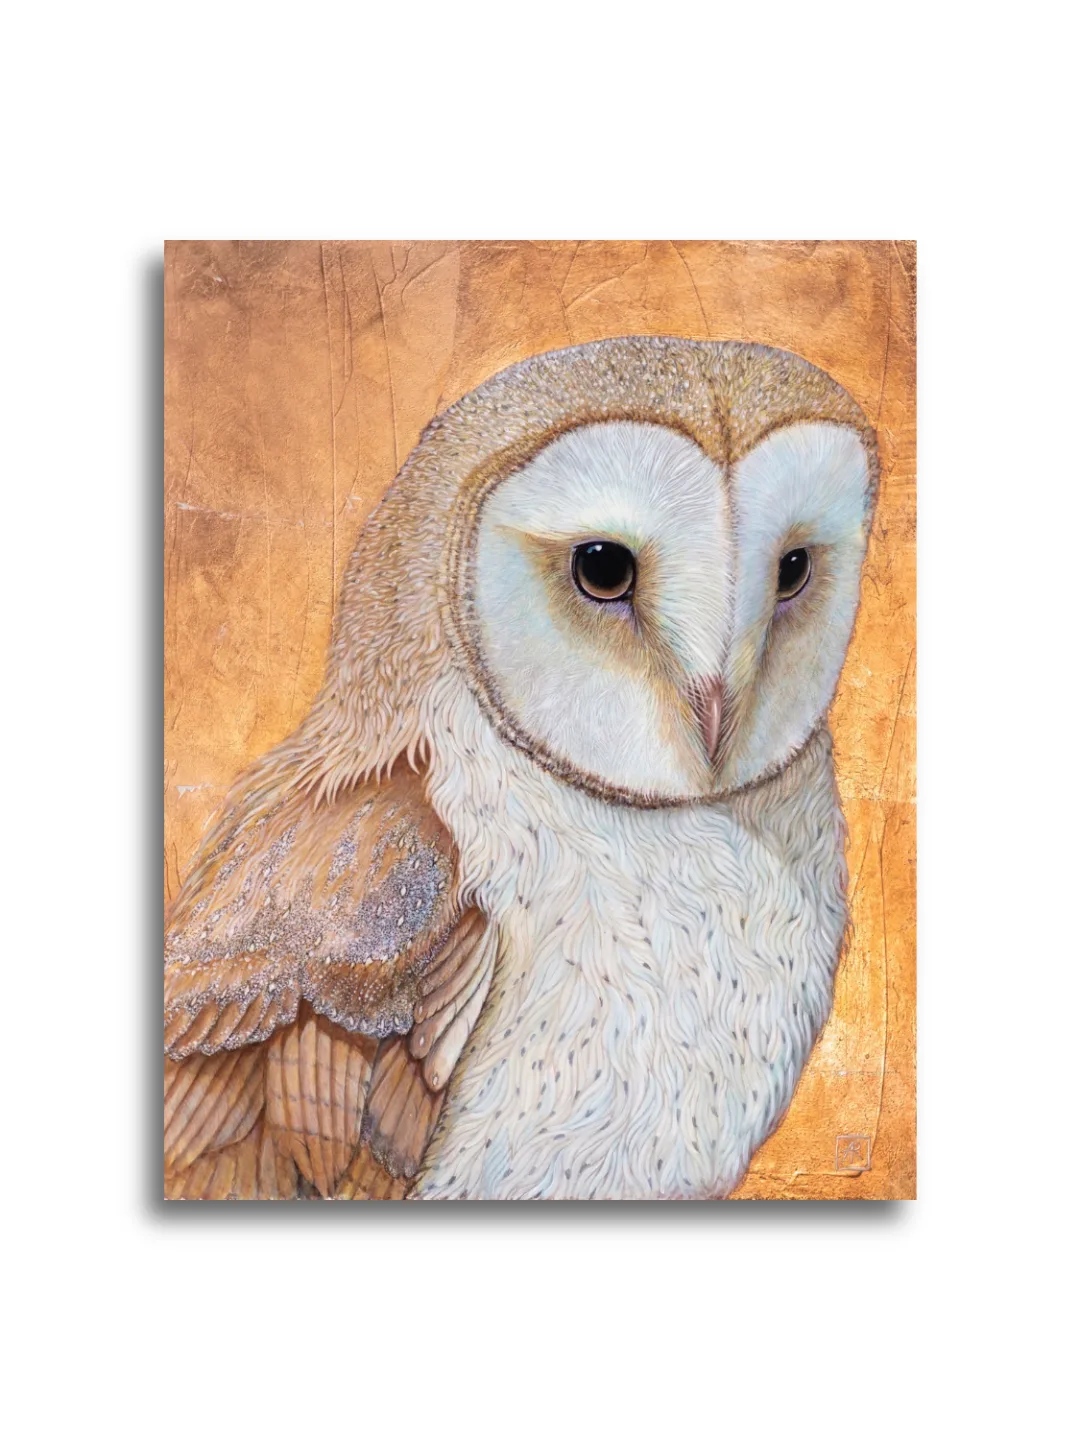 Barn Owl by Ann Richmond - A beautiful Fine-Art Print of a resting Barn Owl. Limited inventory remains in our Print Sale...